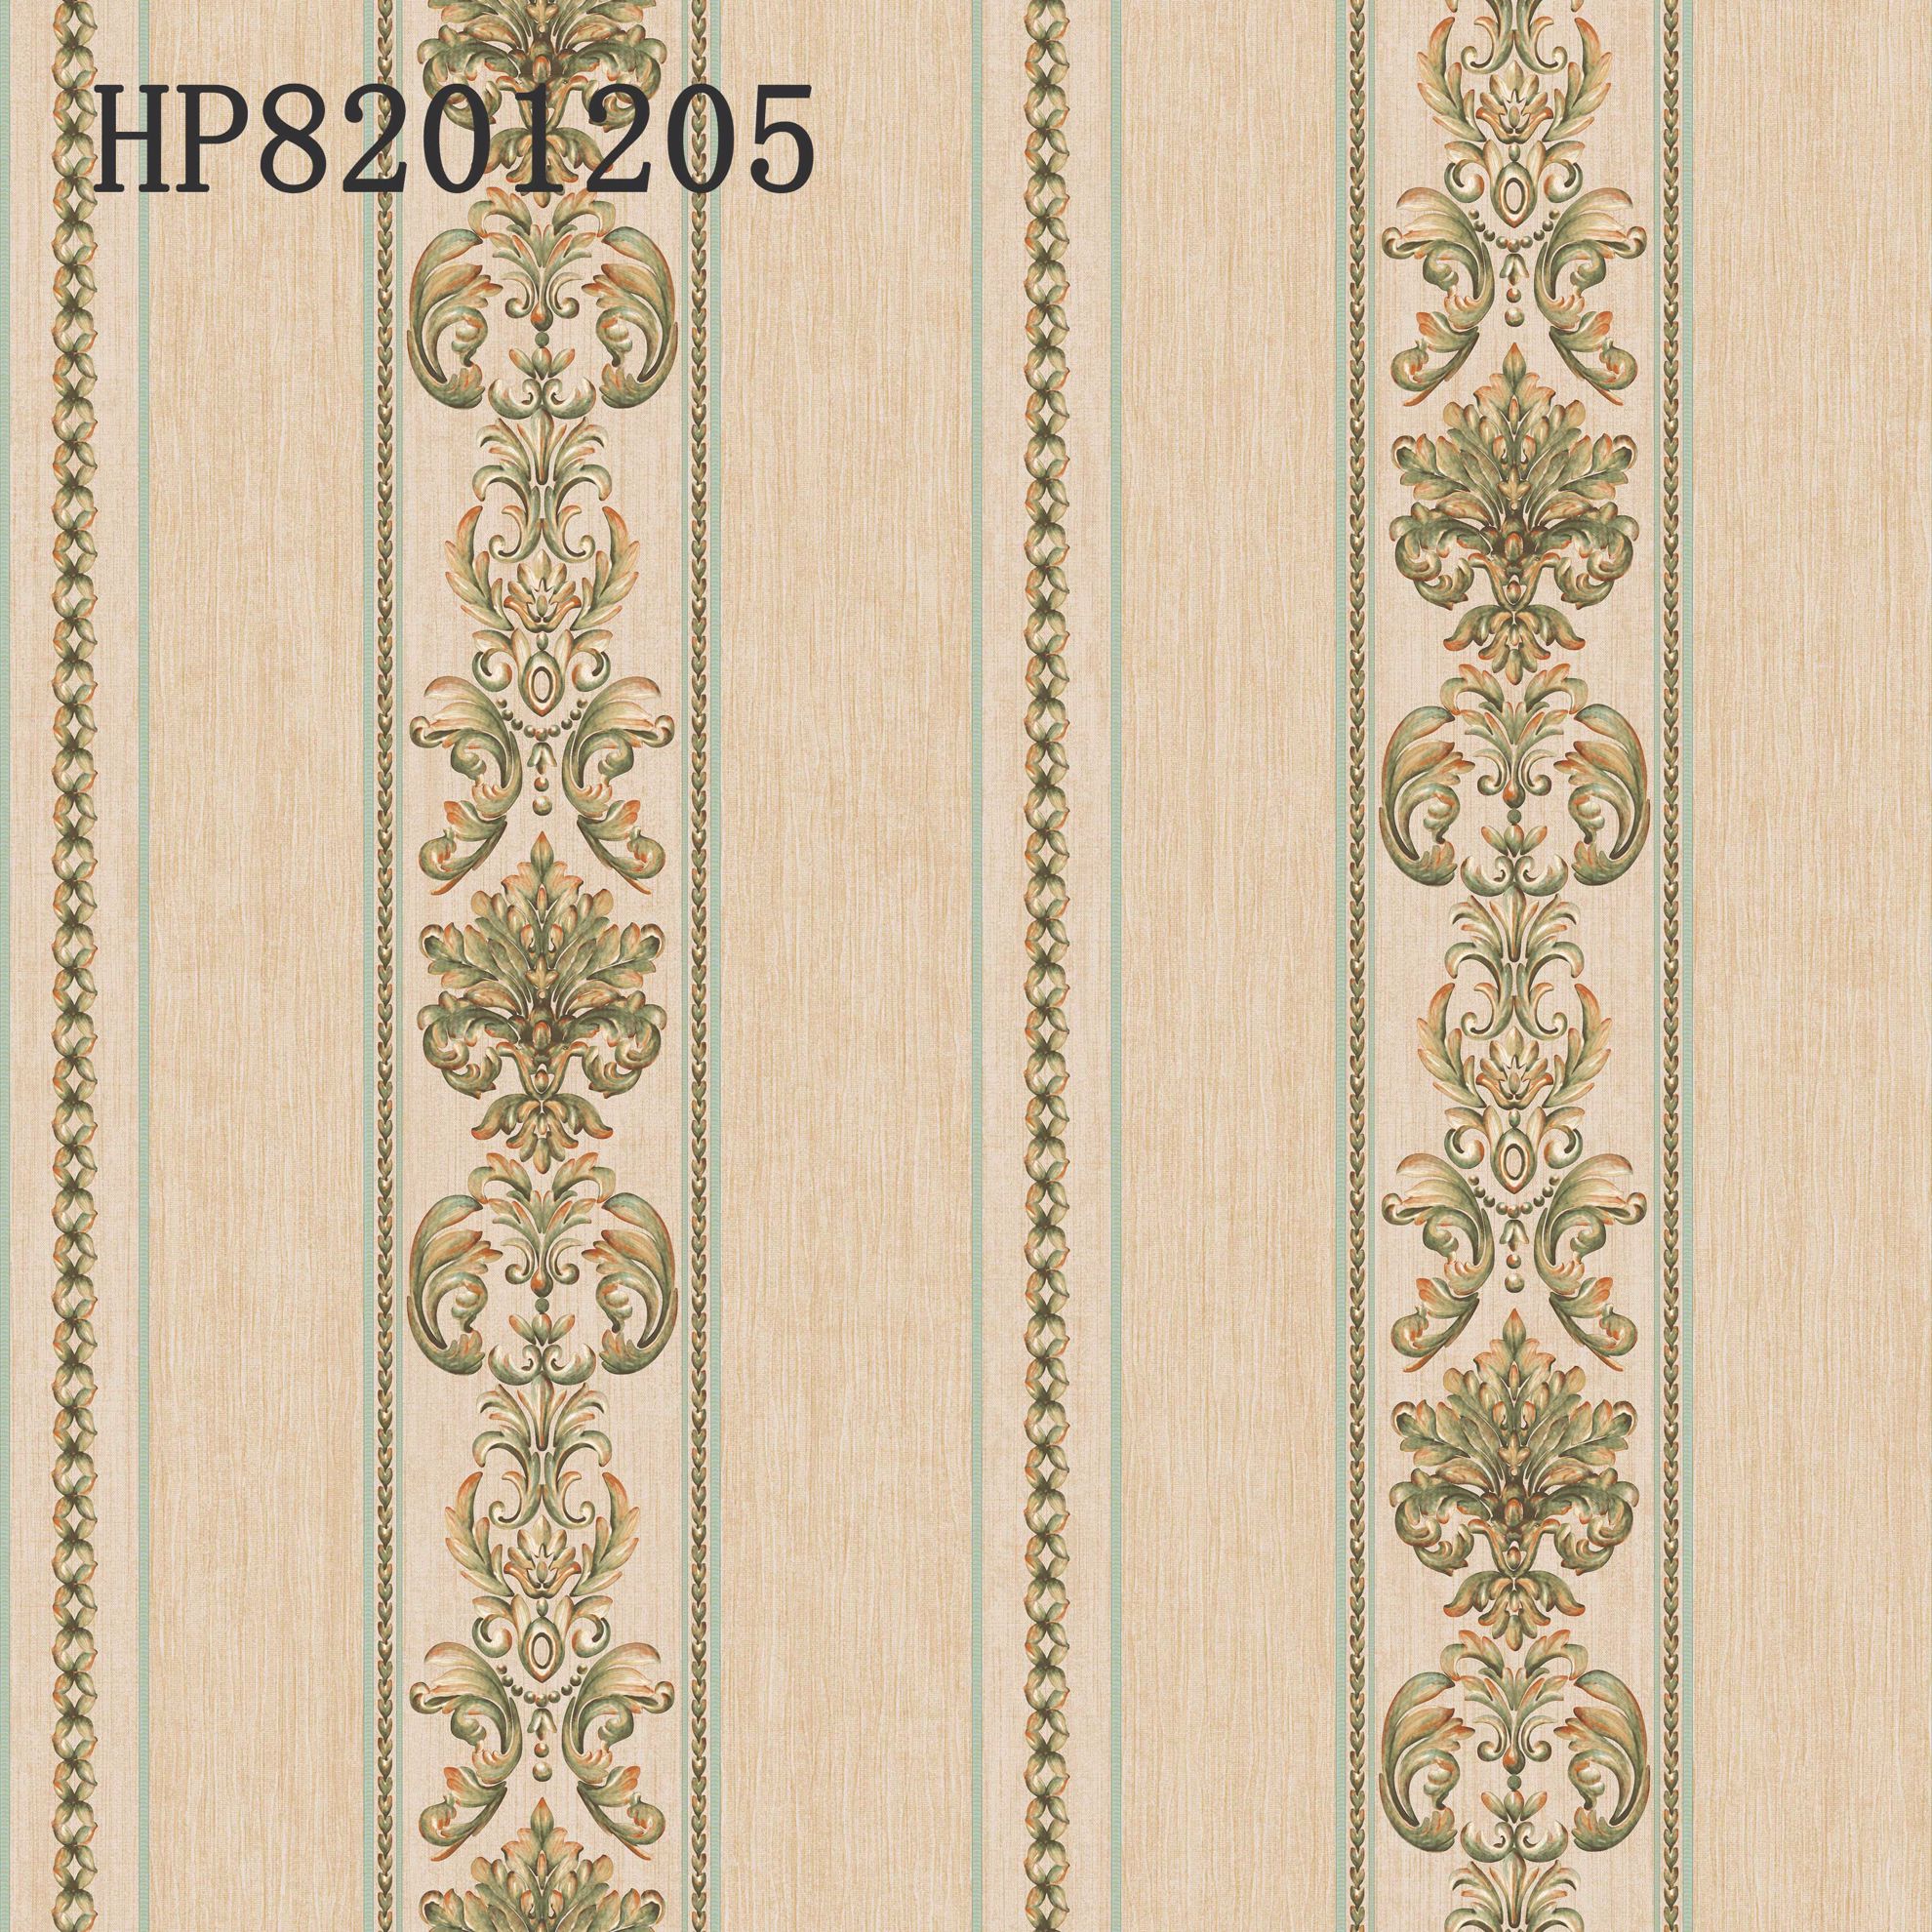 3d Wallpaper For Home Decoration HP82001205